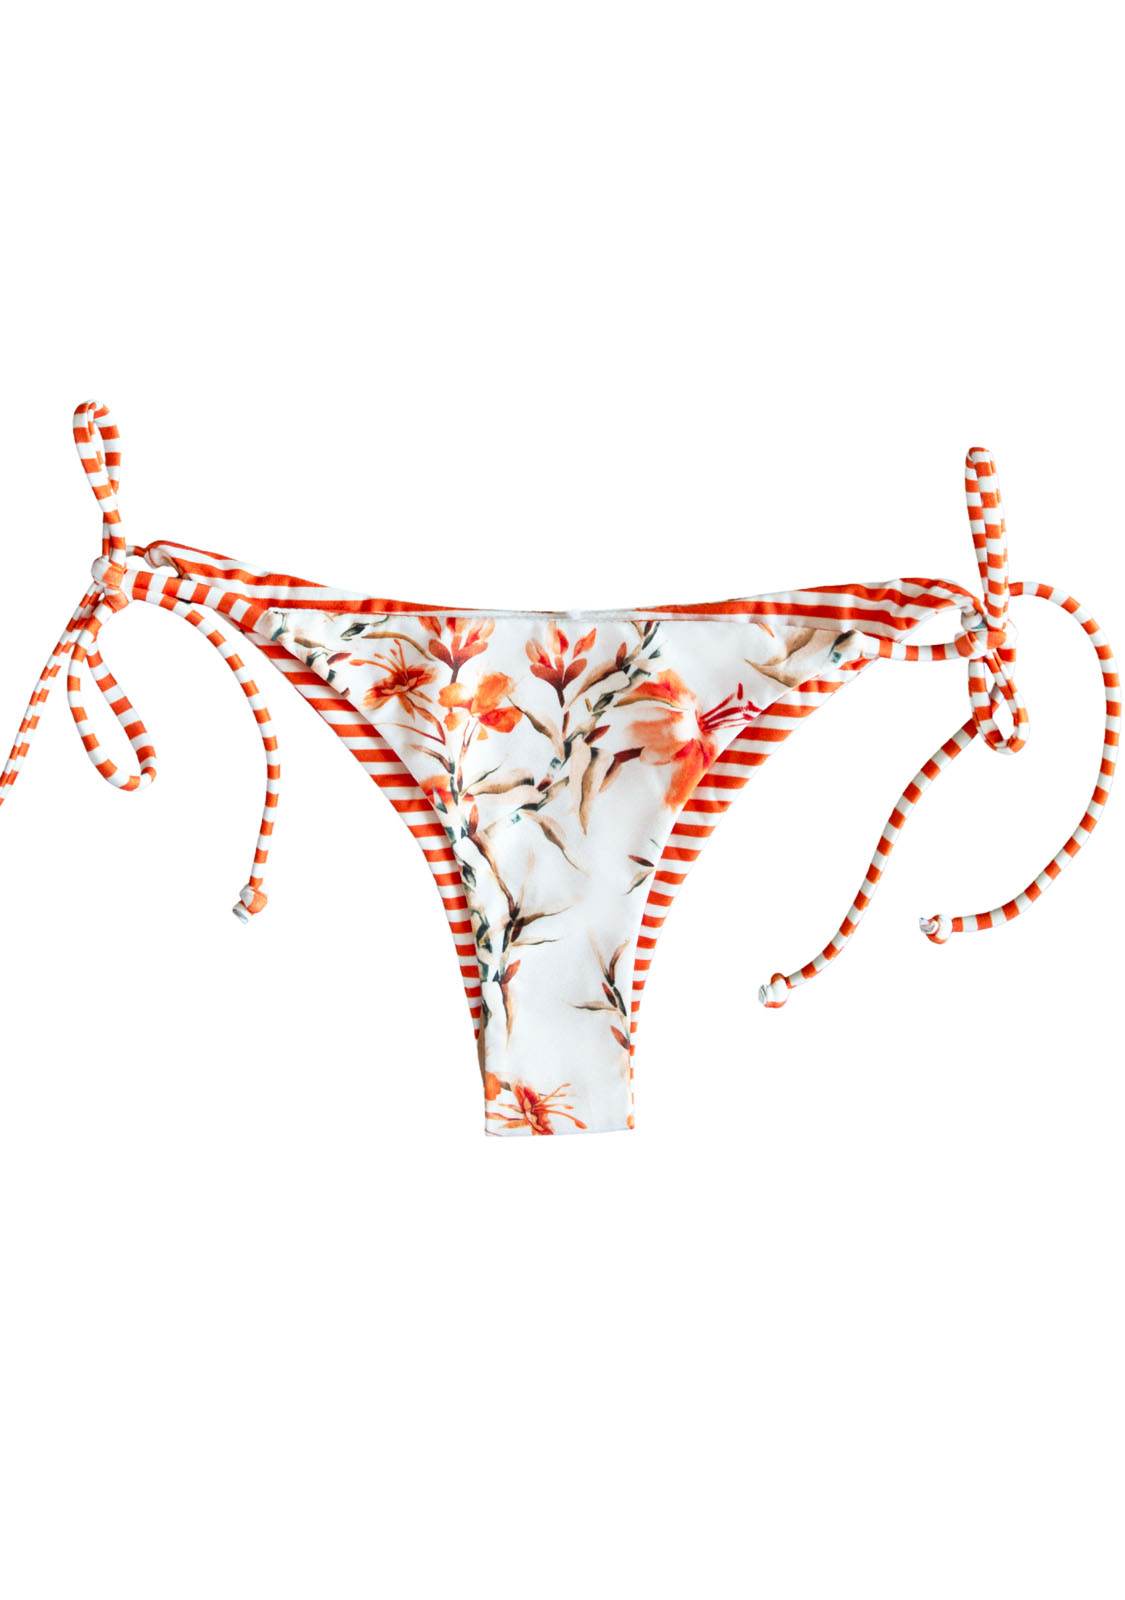 Cheeky Bottoms Reversible Orange Floral white stripe for Women and Teen Girls